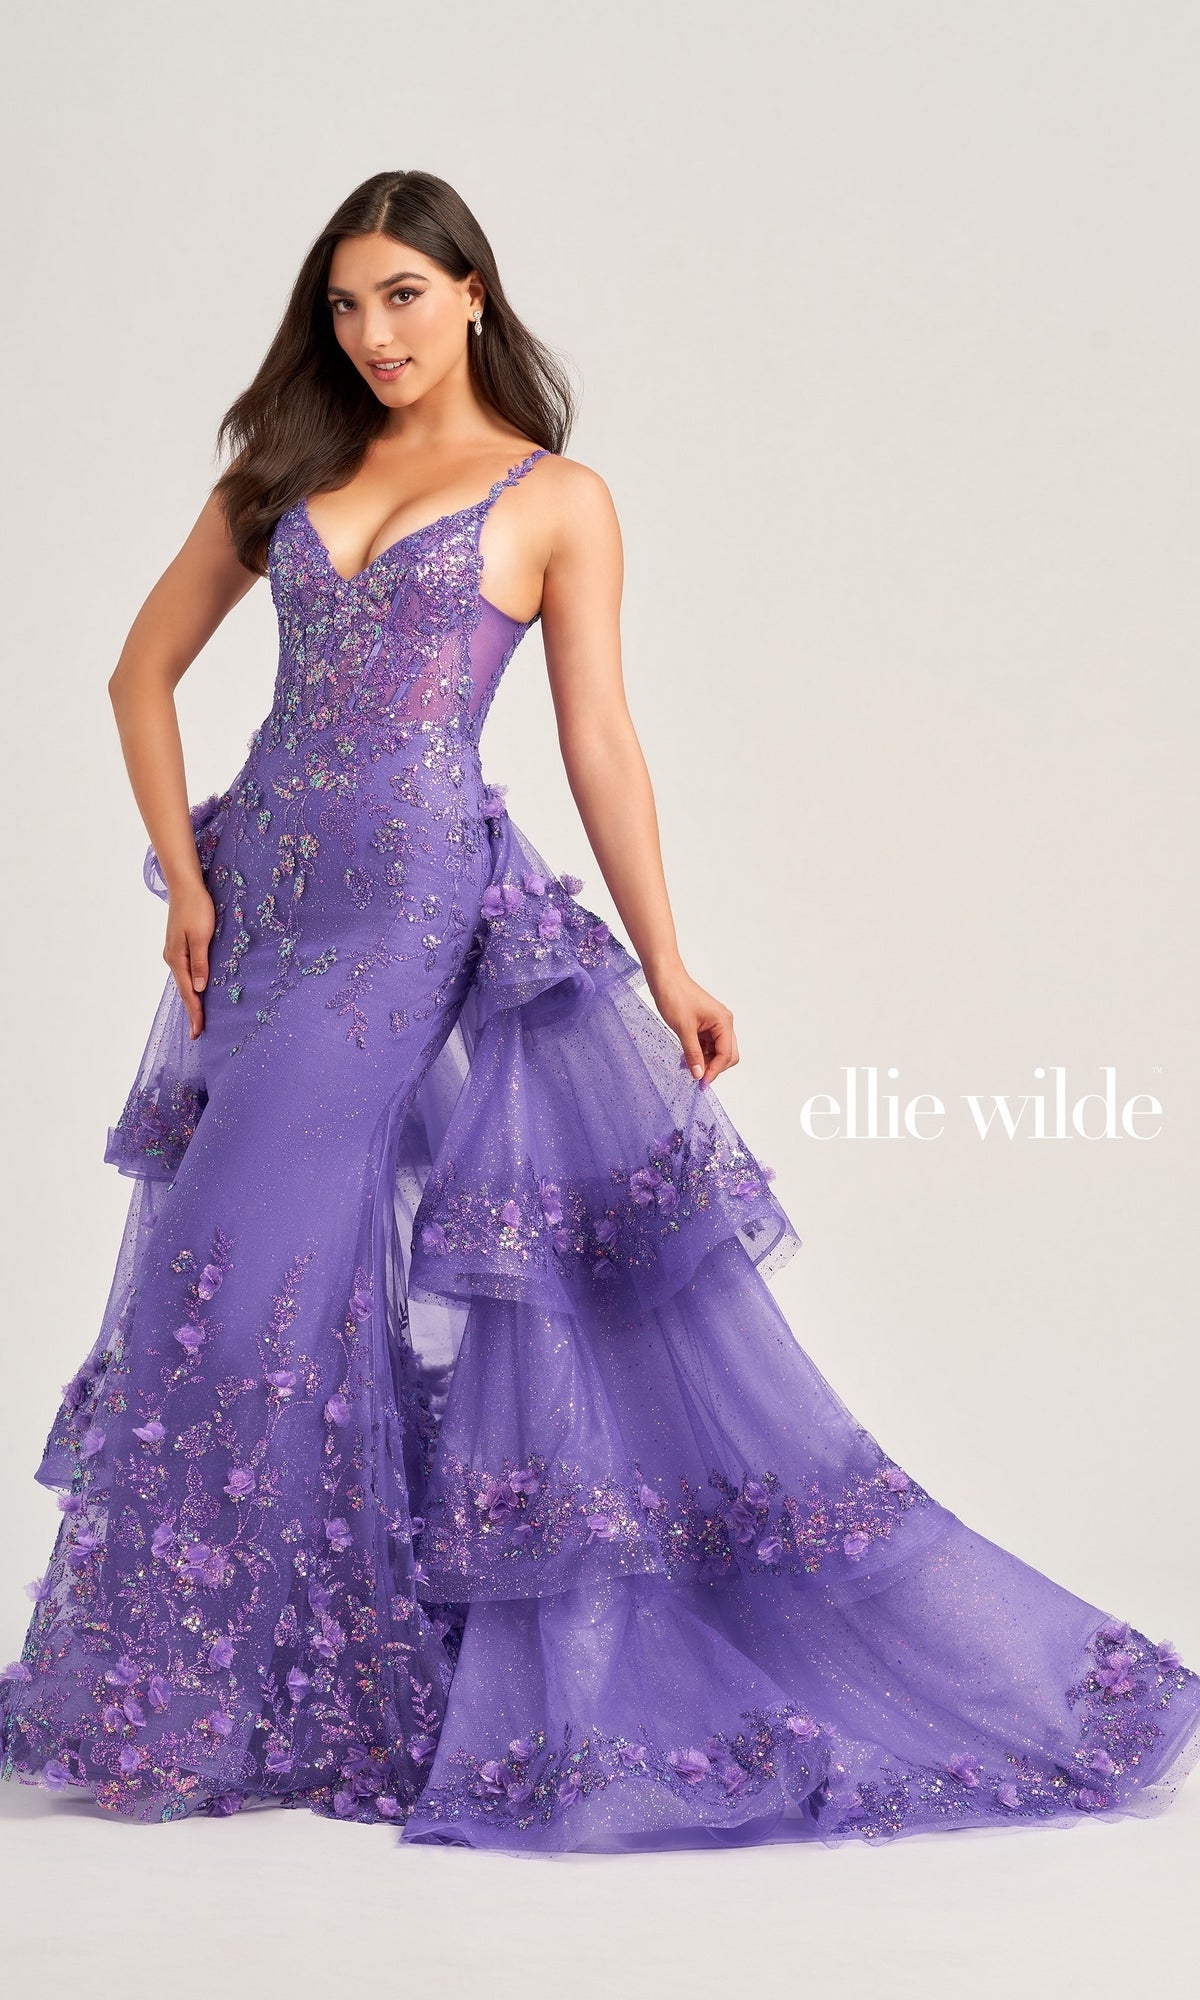 Ellie Wilde  Prom Dresses For Those Who Live Wilde